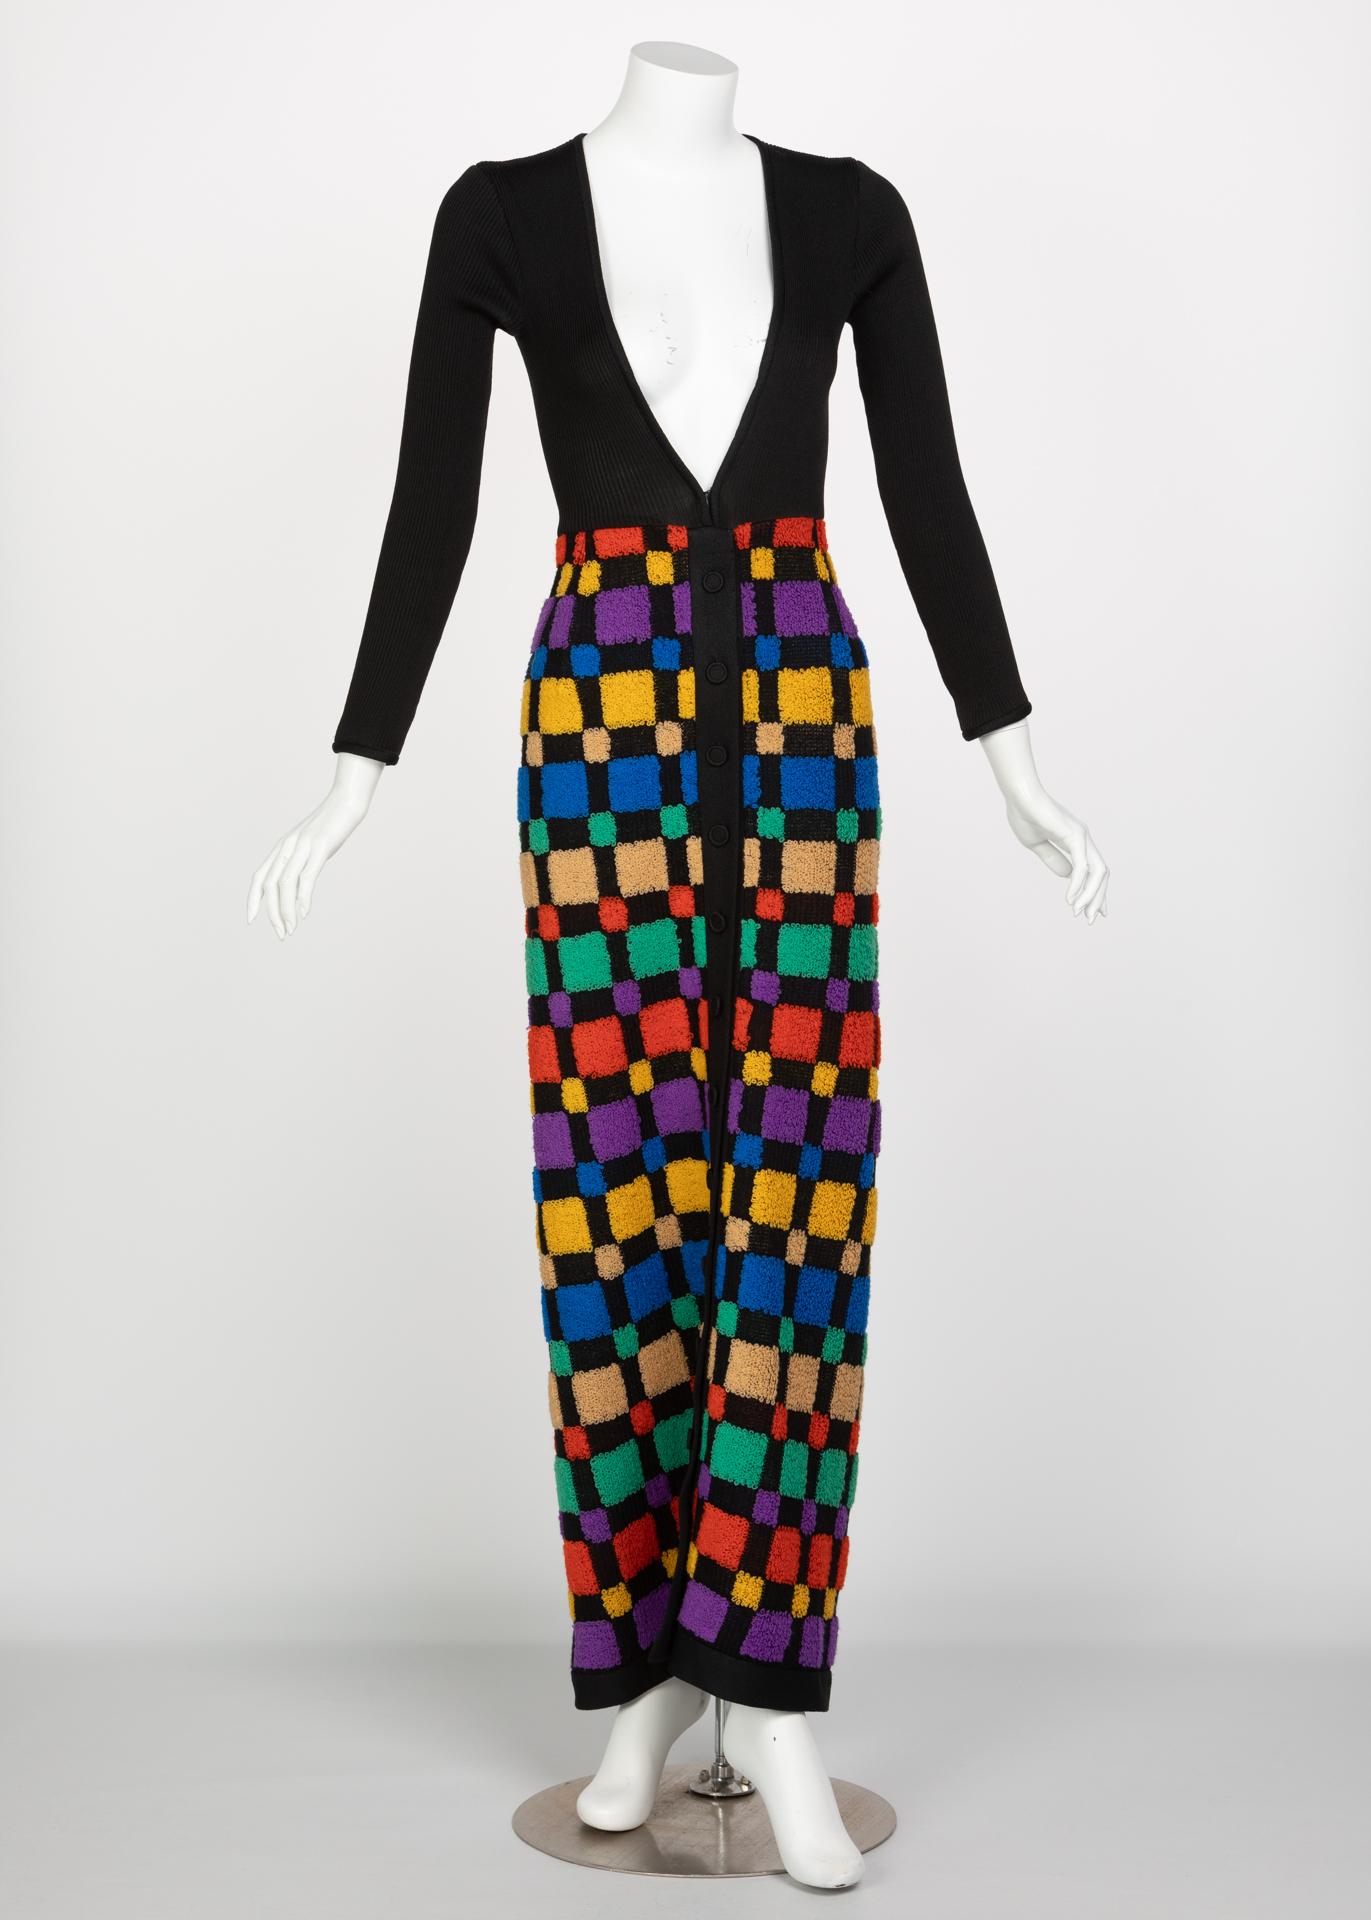 As the 1960s moved into the 70s, the fashion became filled with vivid vibrant colors and daring new silhouettes. Color-blocking was the trend and rising social changes challenged what was seen as appropriate for women in those days. Featuring a